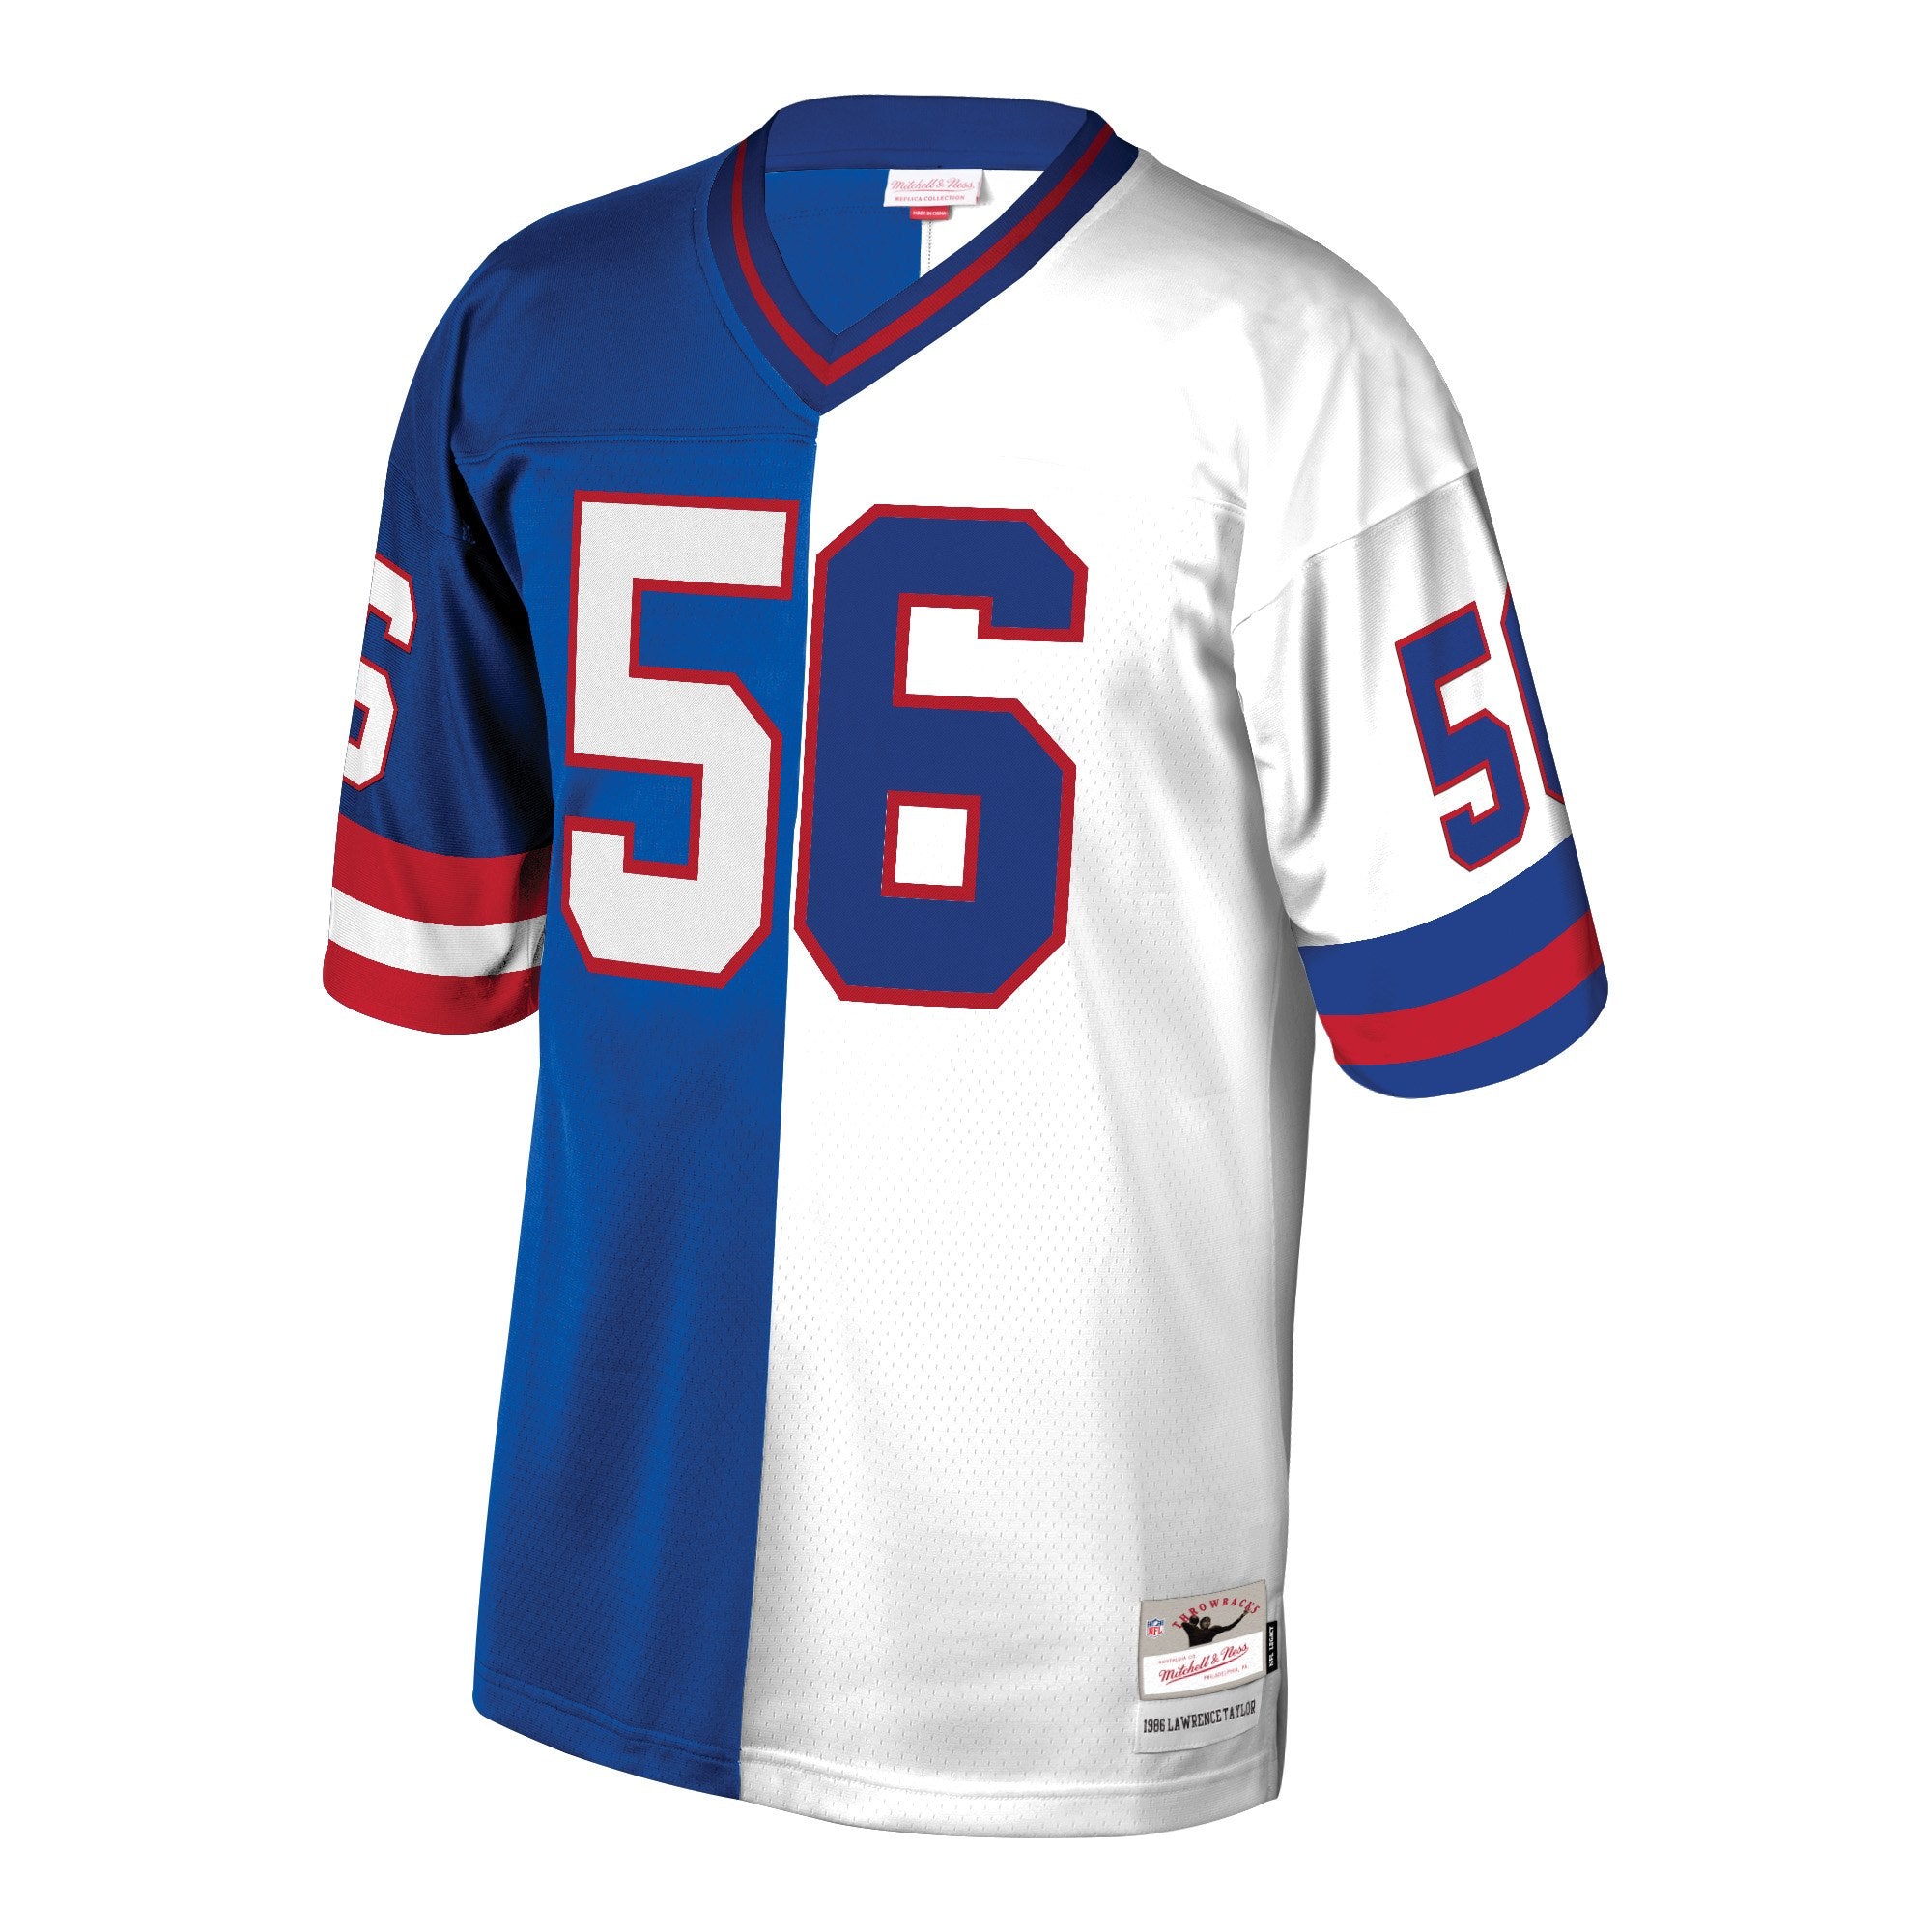 New York Giants bring back Lawrence Taylor to unveil throwback jersey